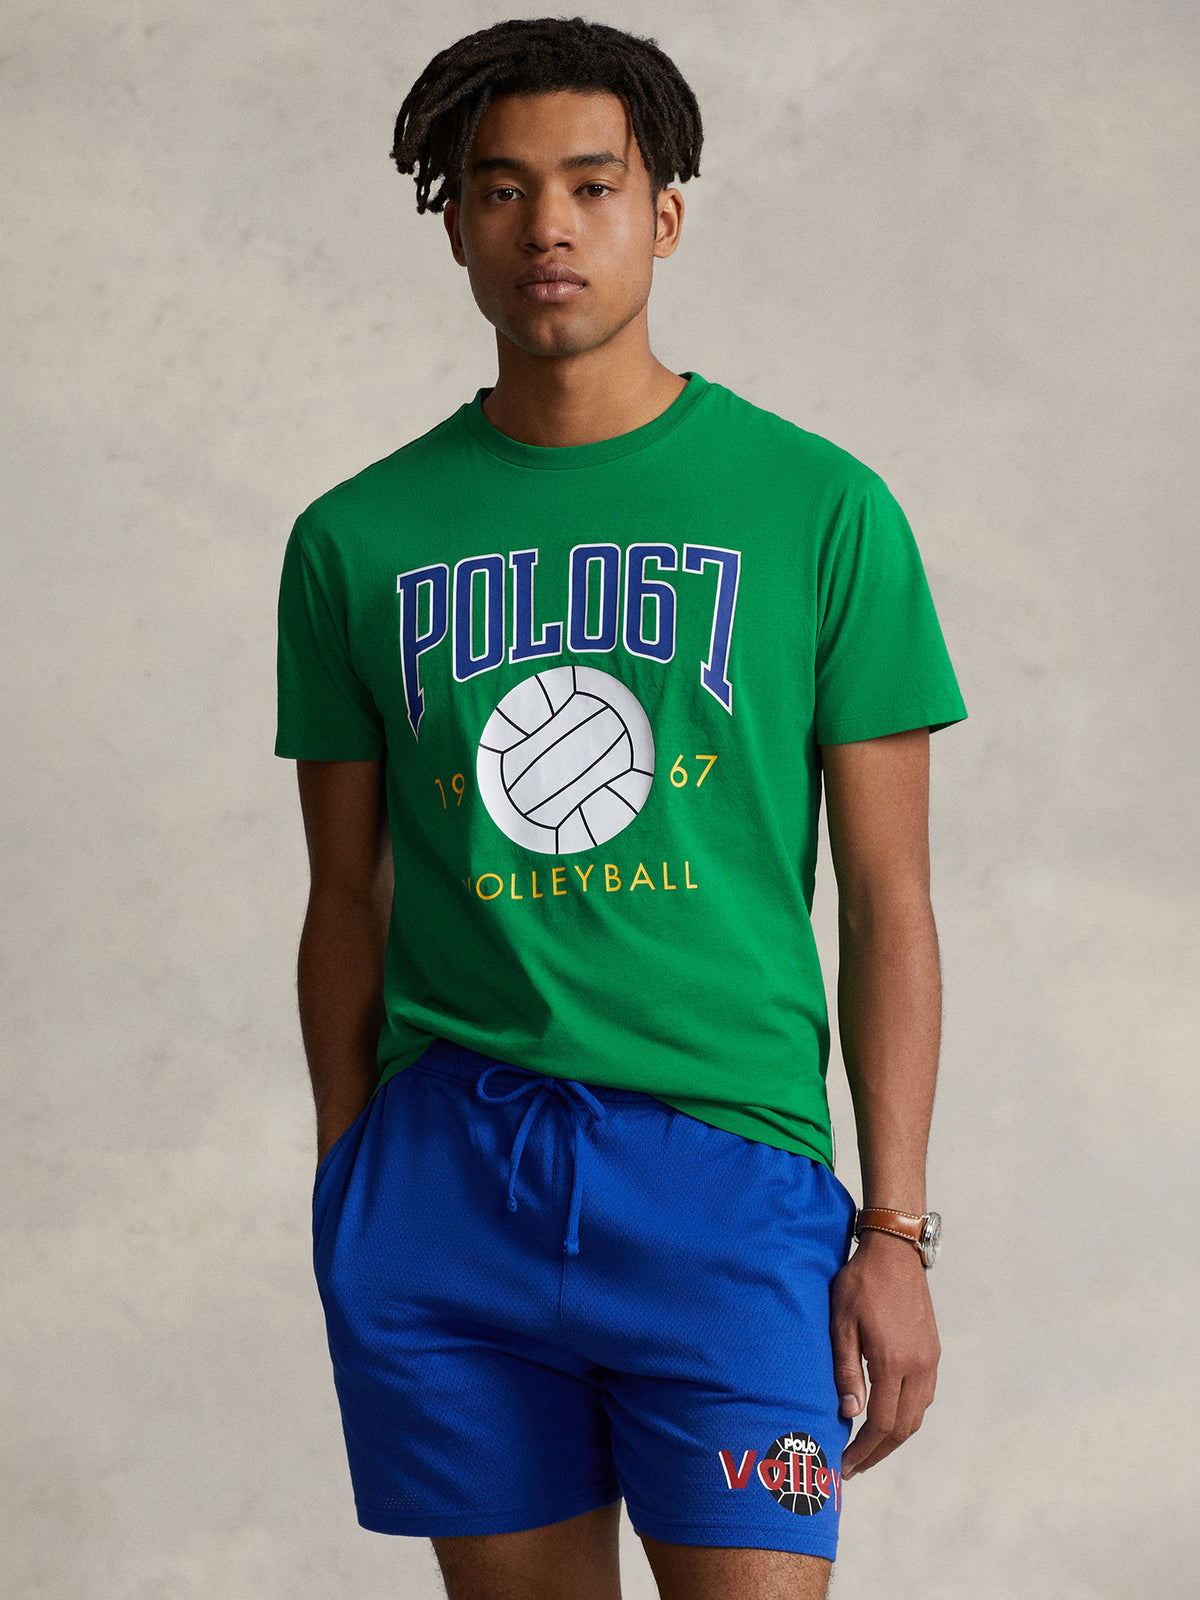 Volley 67 T-Shirt in English Green